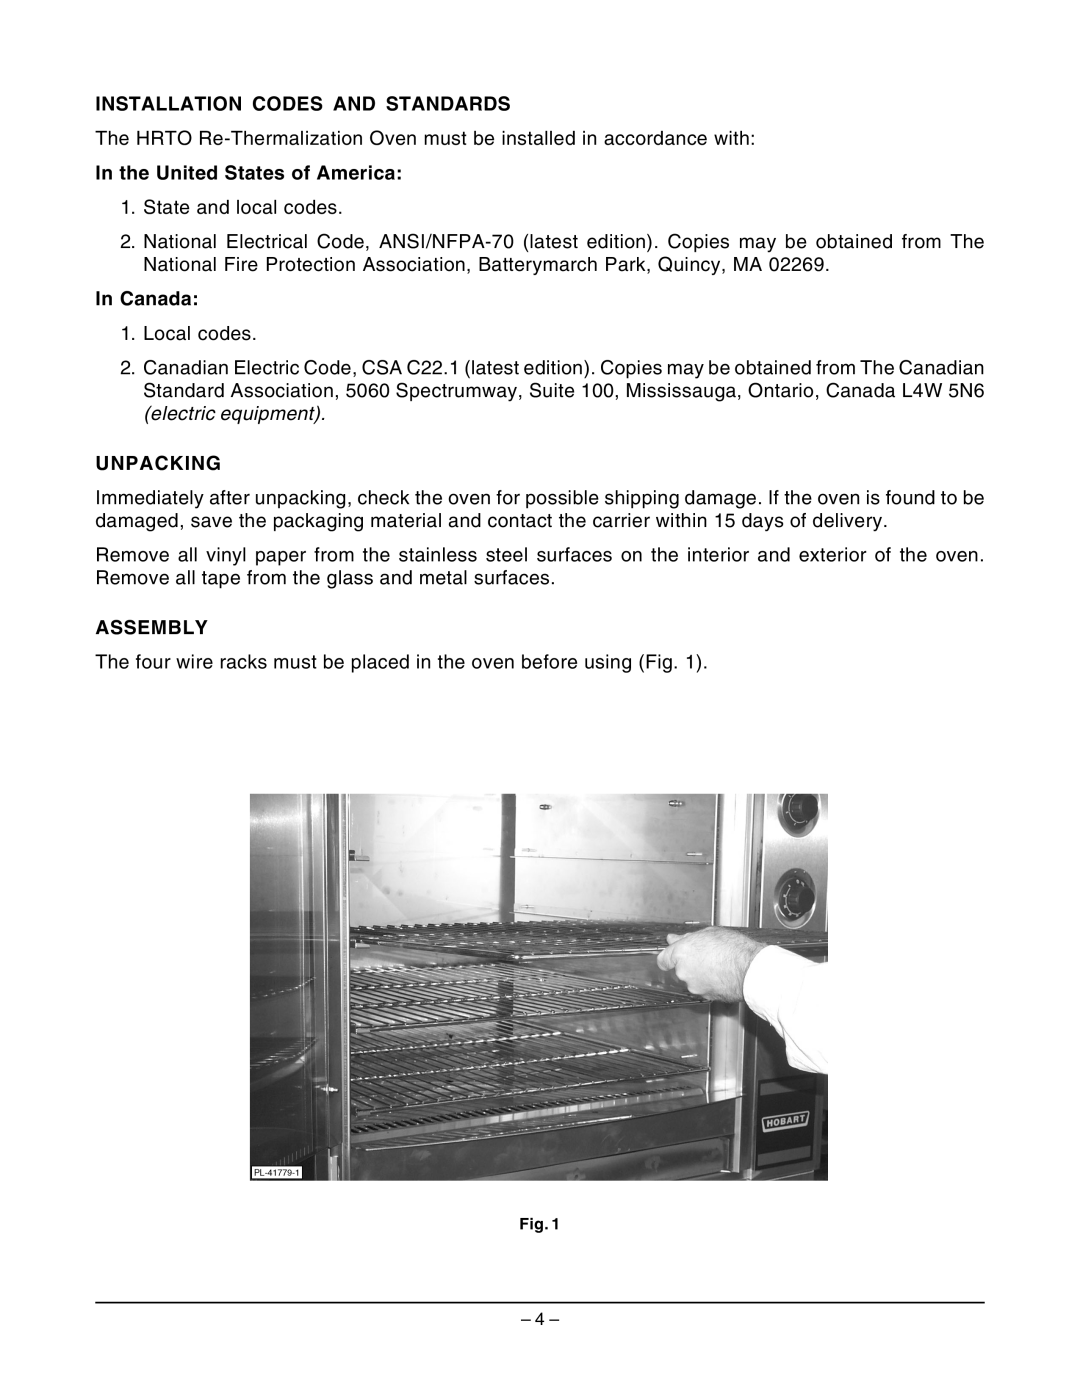 Hobart ML-132064 manual Installation Codes And Standards, In the United States of America, In Canada, Unpacking, Assembly 